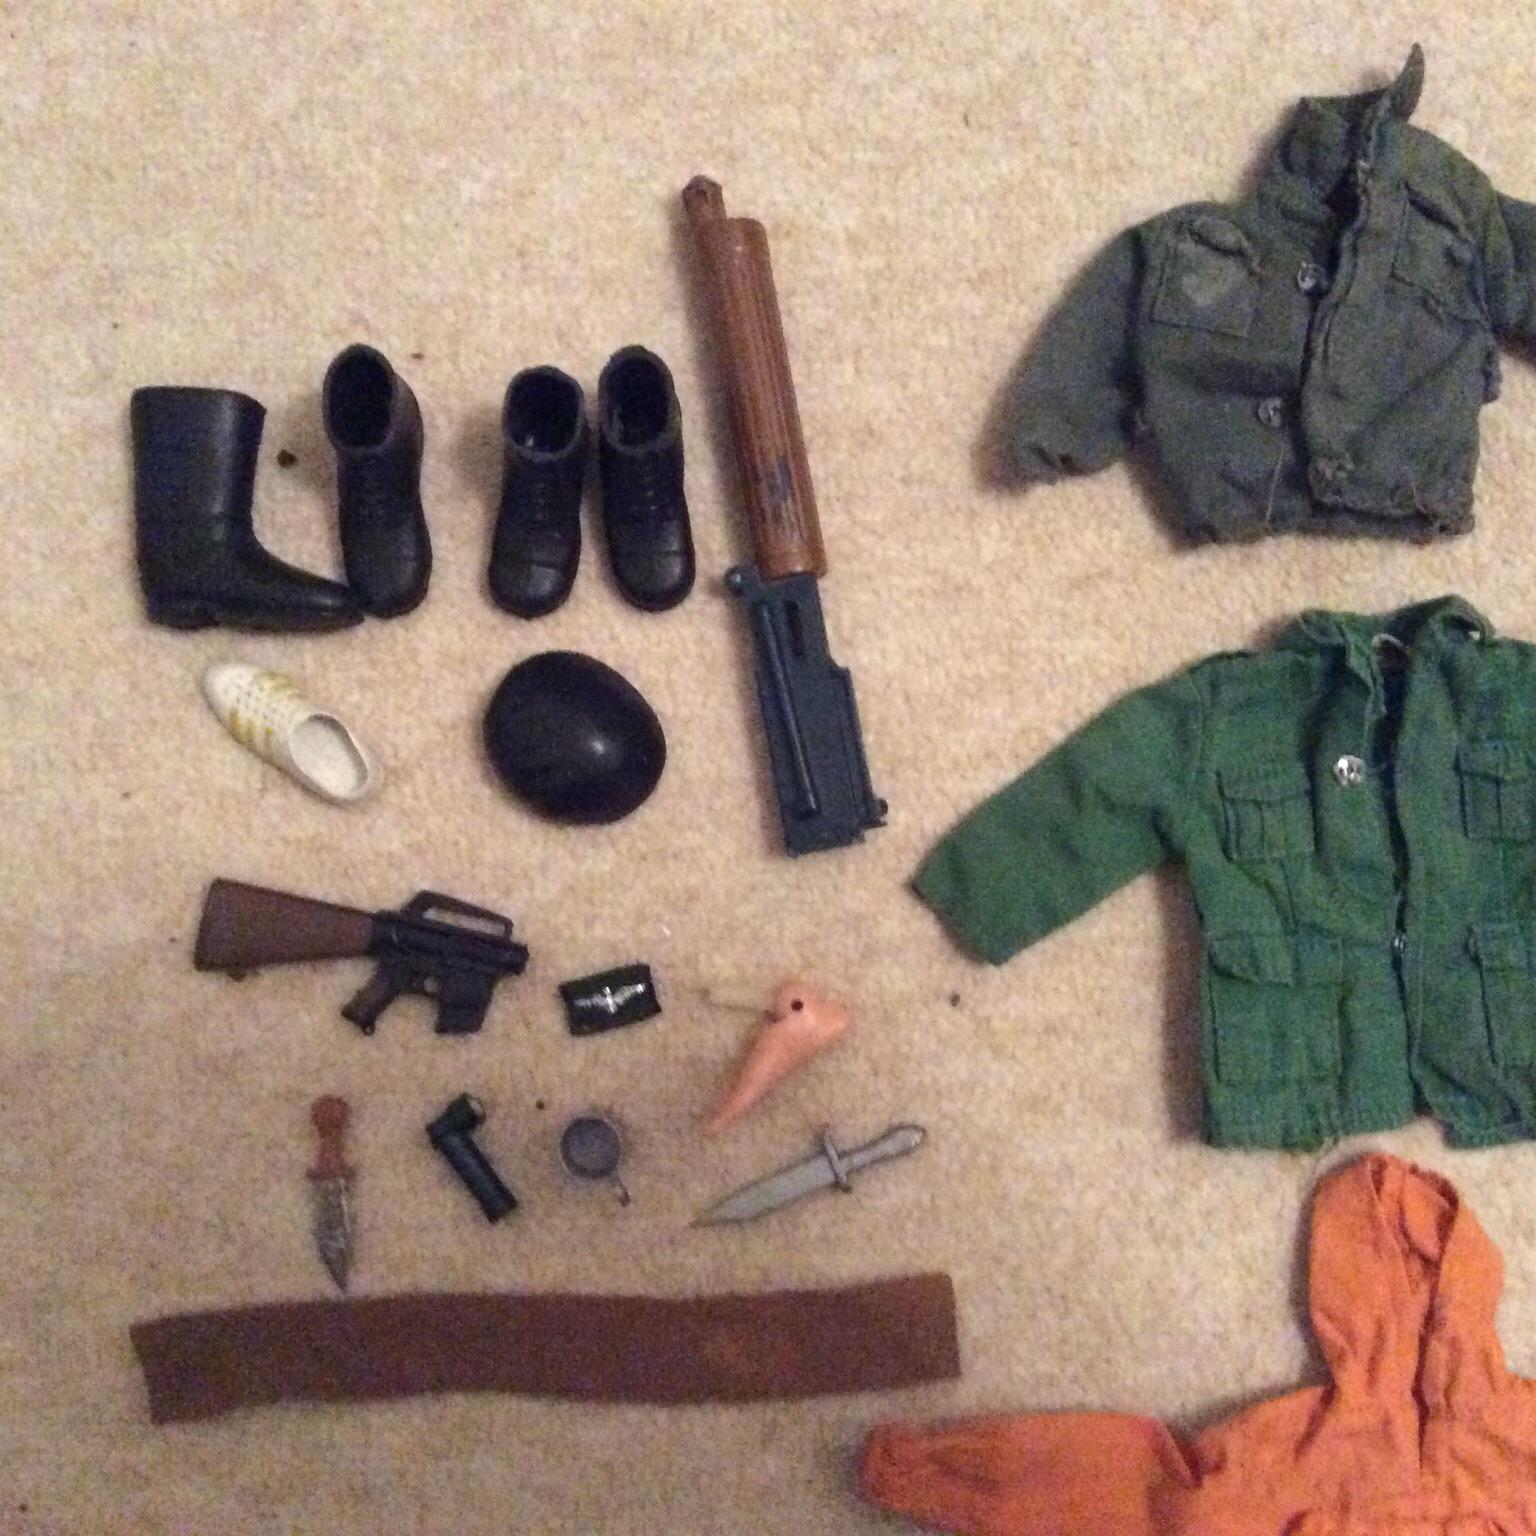 action man accessories